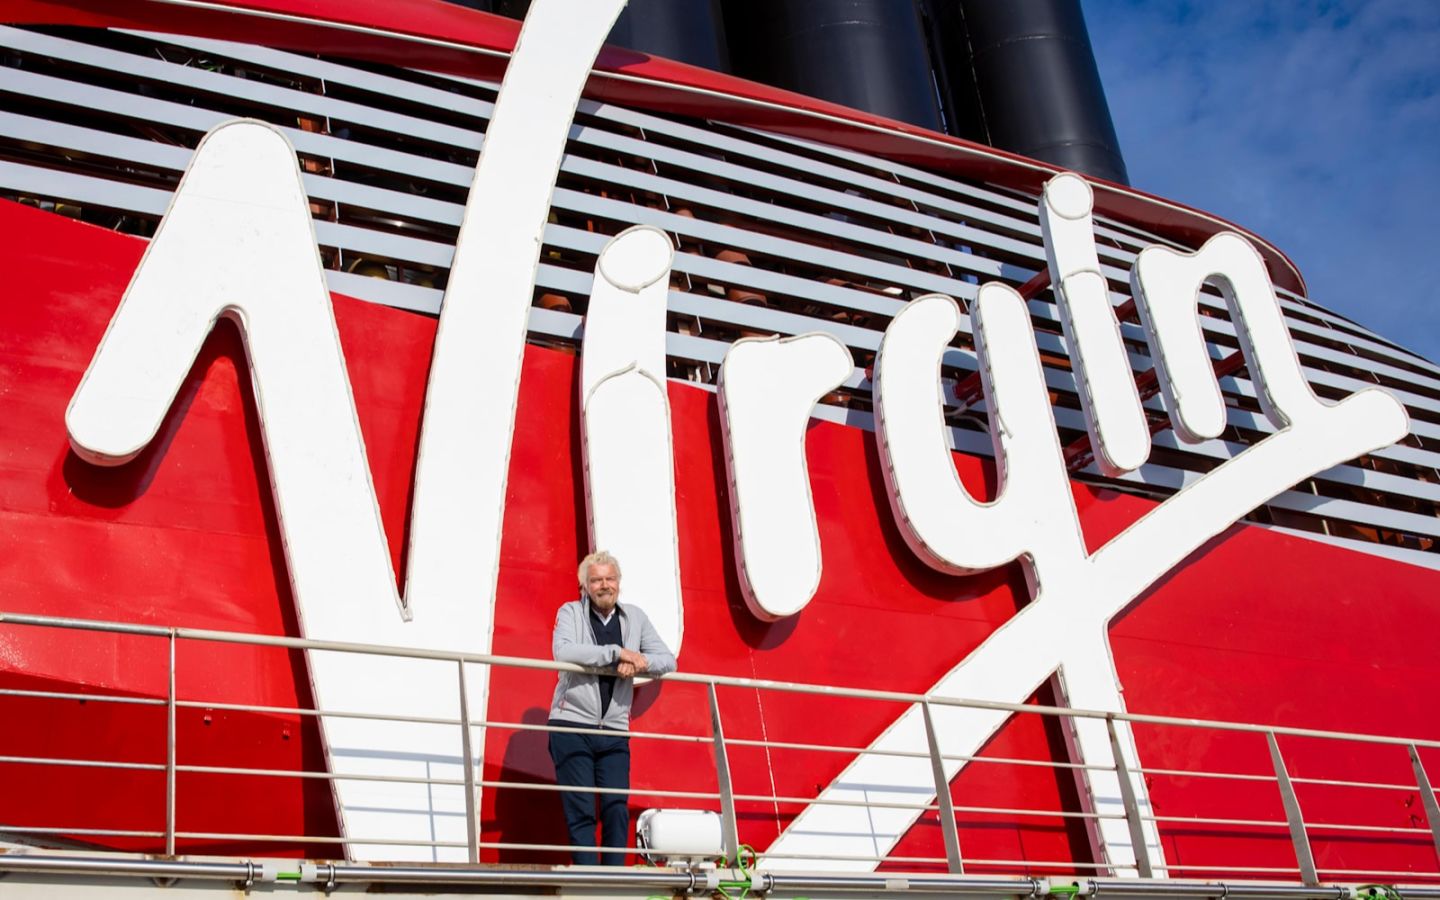 Richard Branson smiling on the back deck of Scarlet Lady - Virgin Voyages first ship